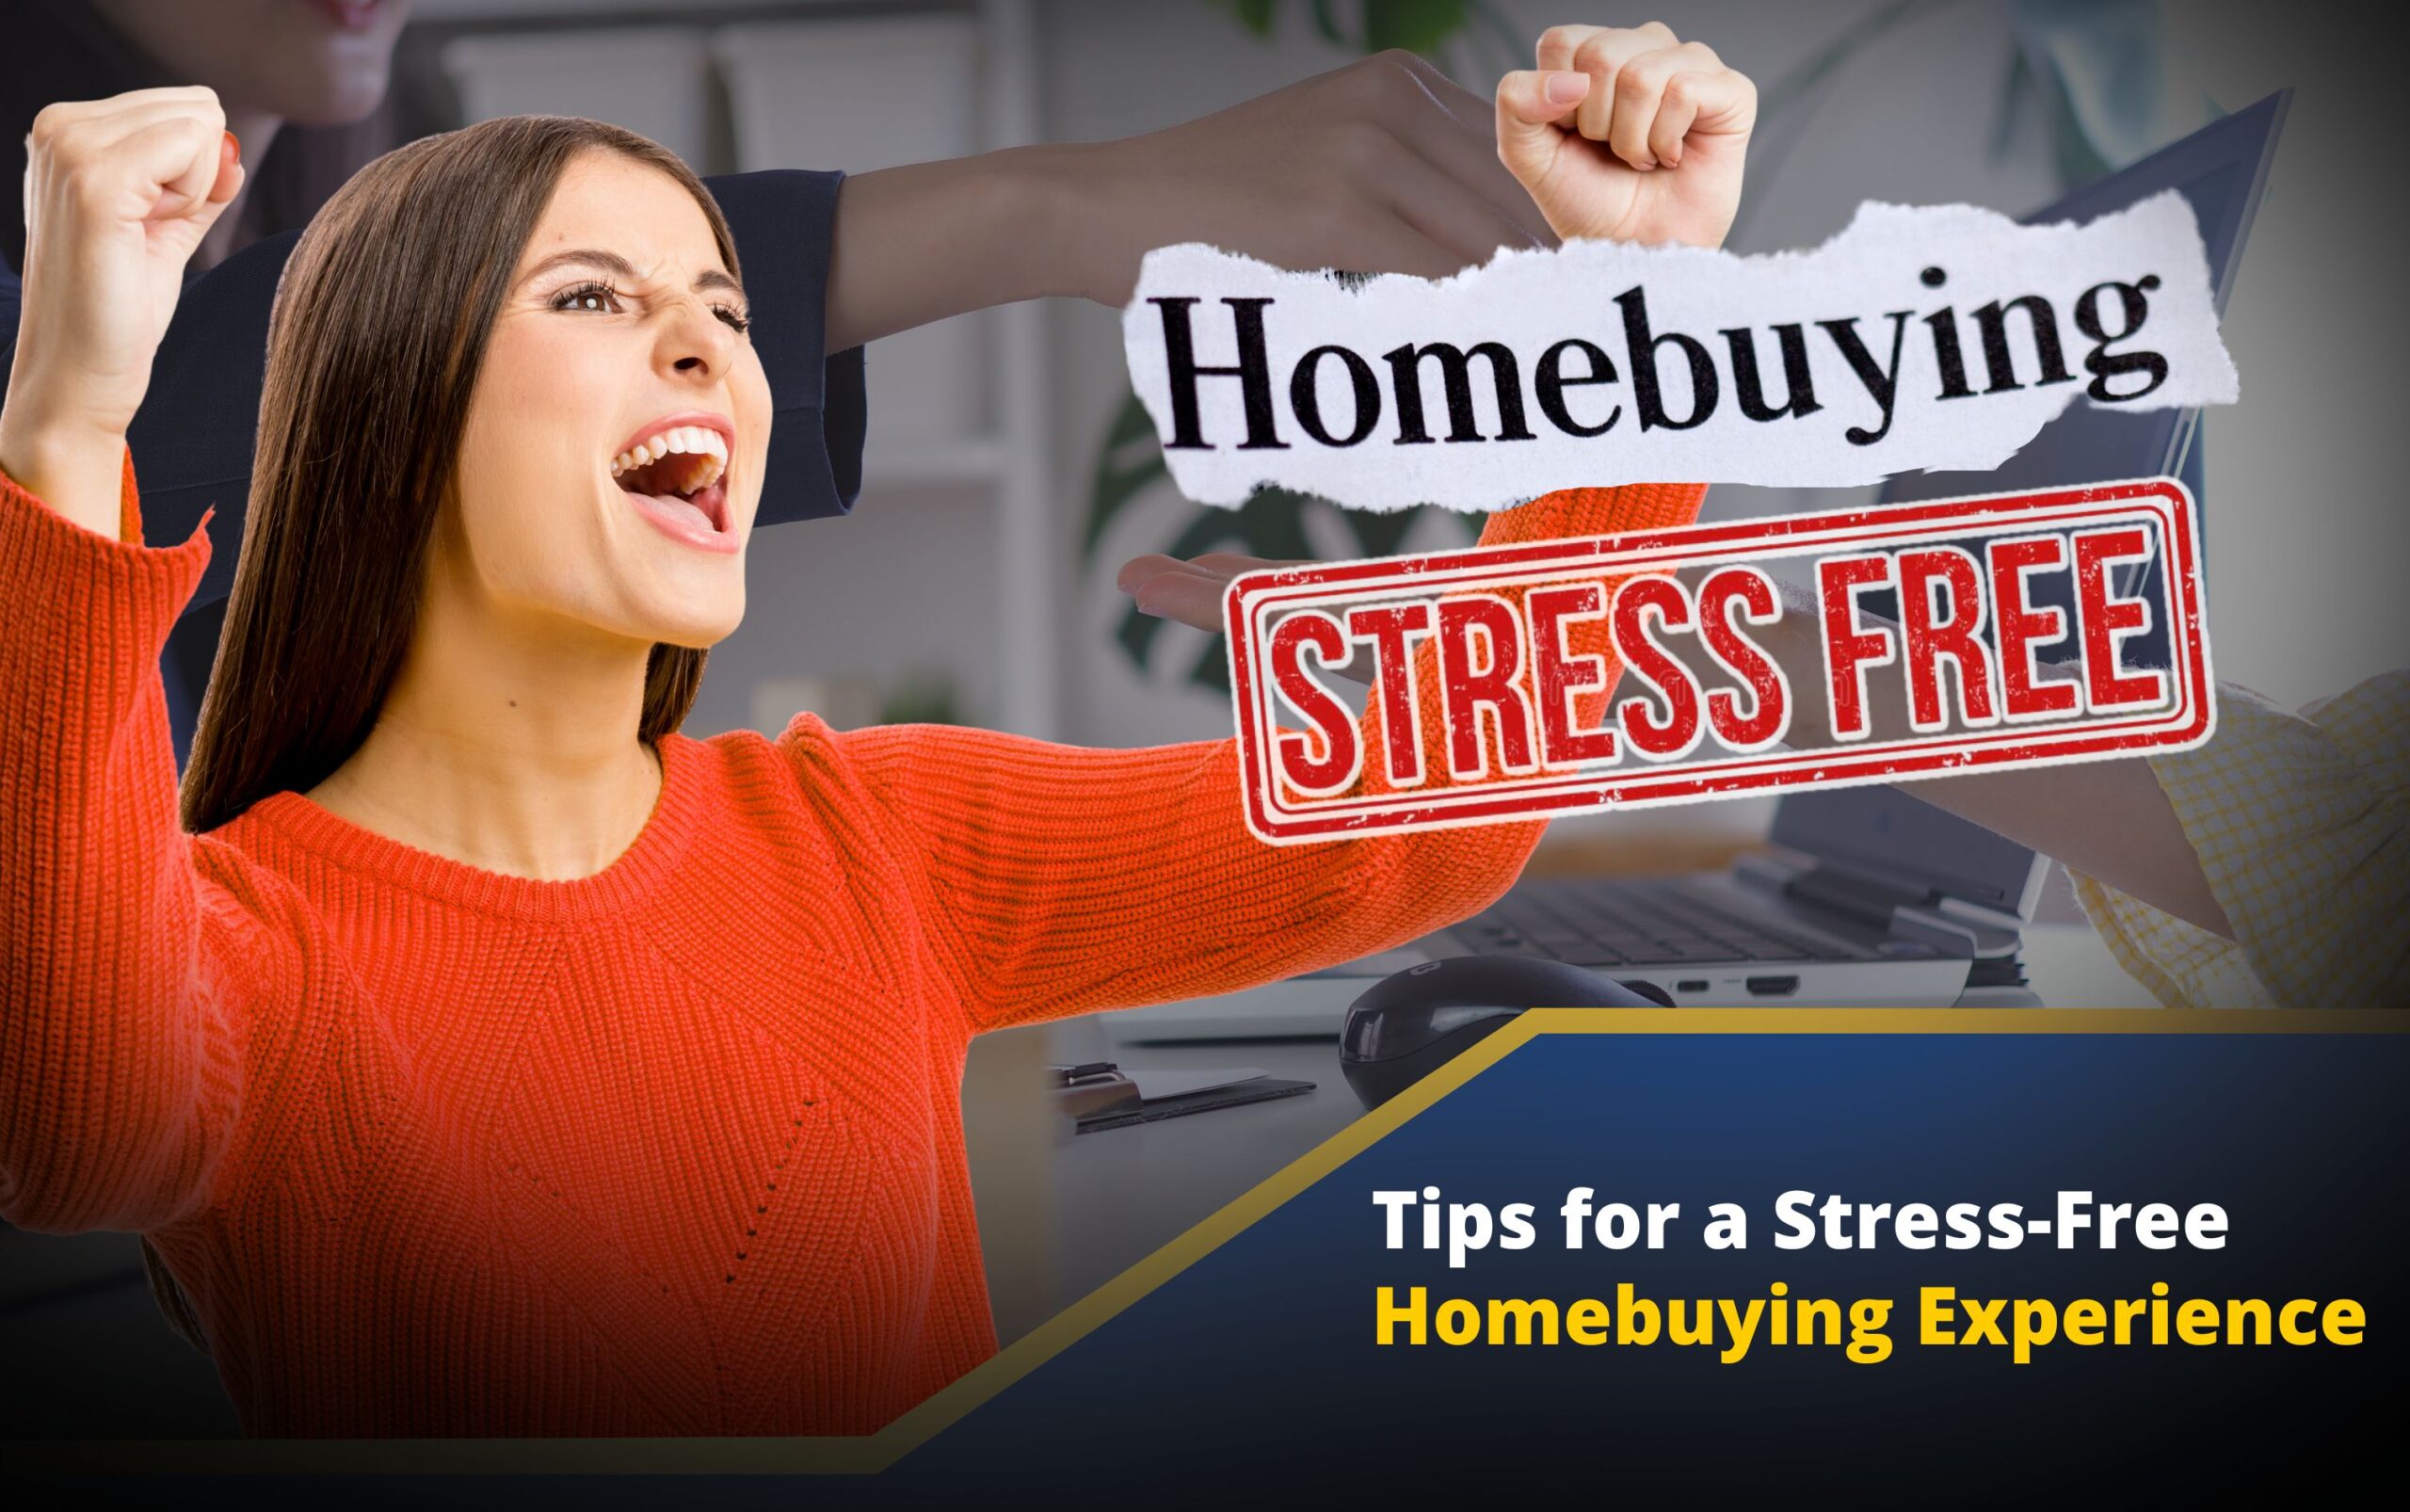 Top 3 Tips for a Stress-Free Homebuying Experience